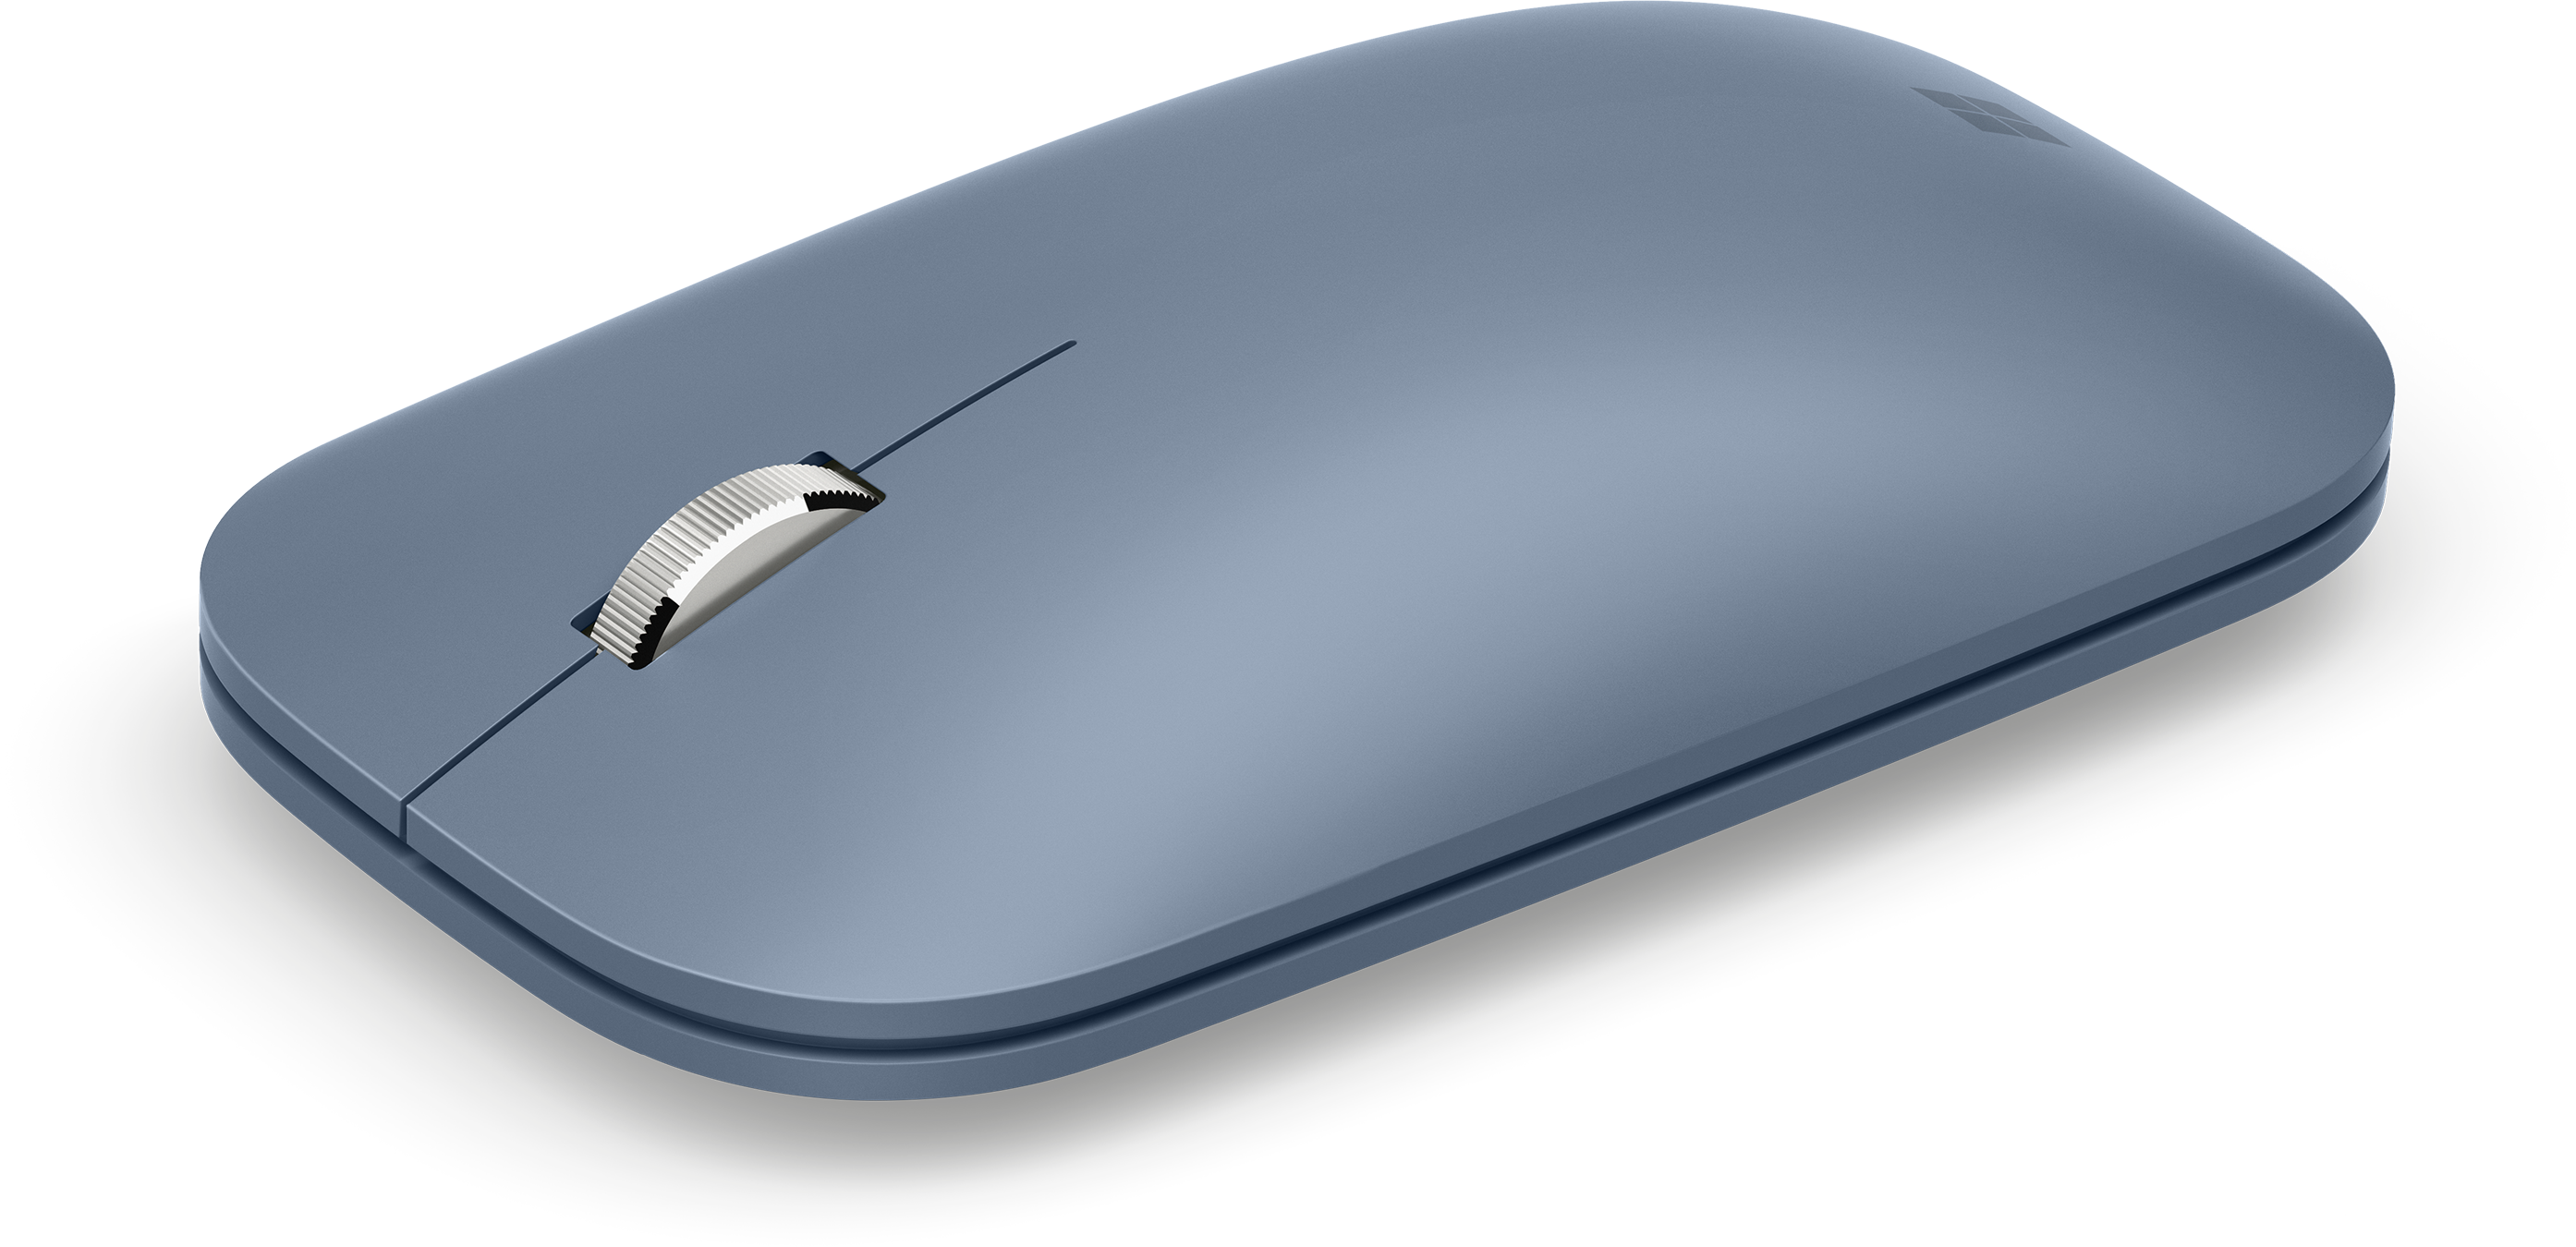 Surface Mobile Mouse Microsoft　BTO パソコン　格安通販